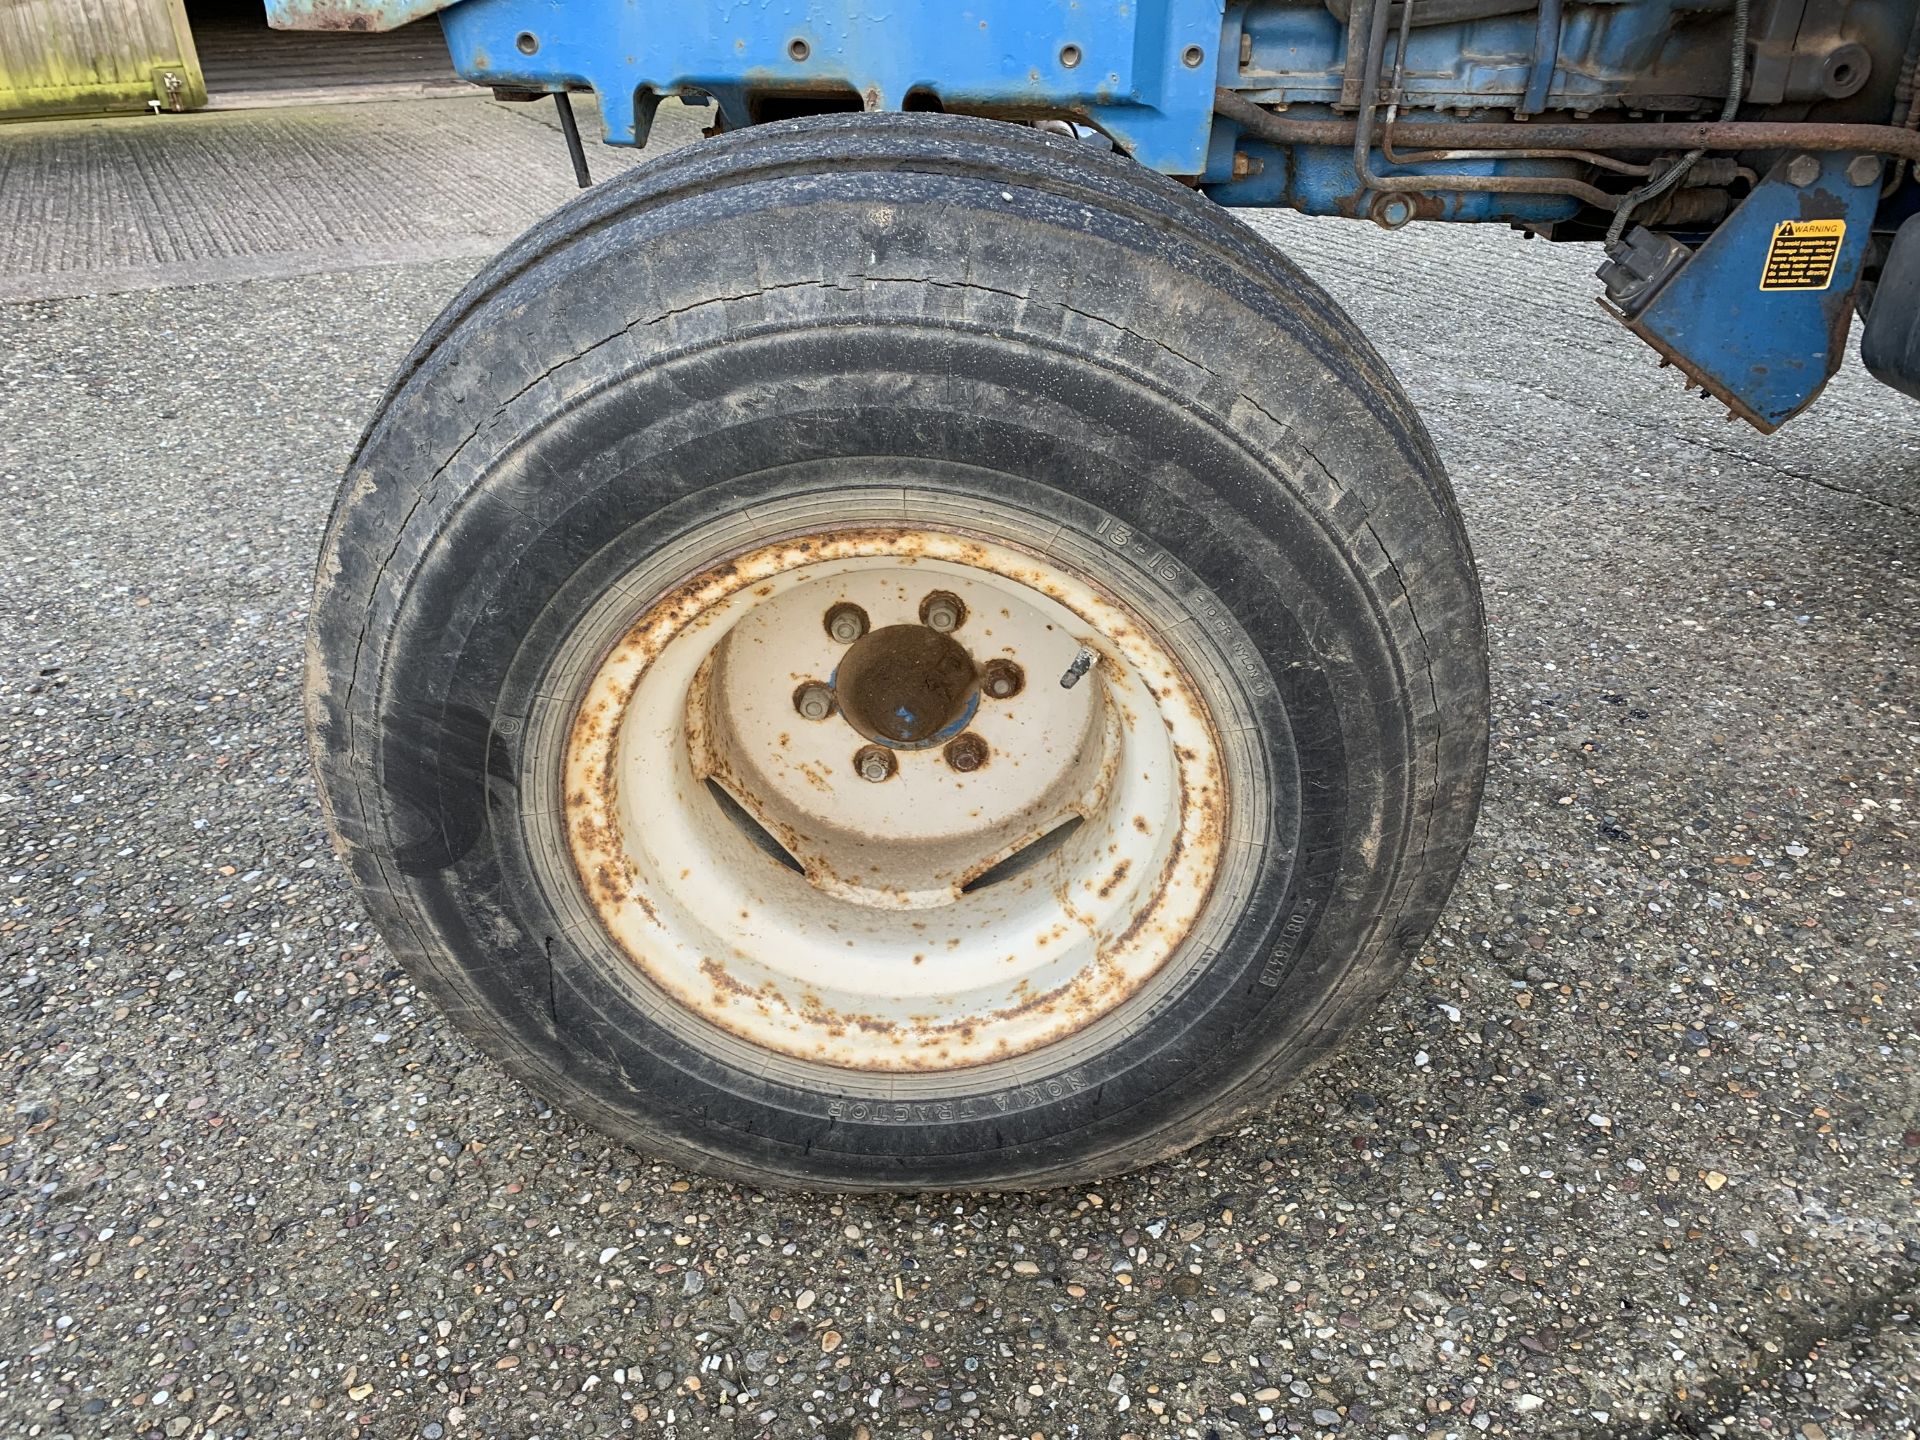 1993 Ford 7740 Powerstar SLE 2wd tractor L793 VKH, 4380 hours, 13.6R38 rear tyres with 60% tread, - Image 2 of 8